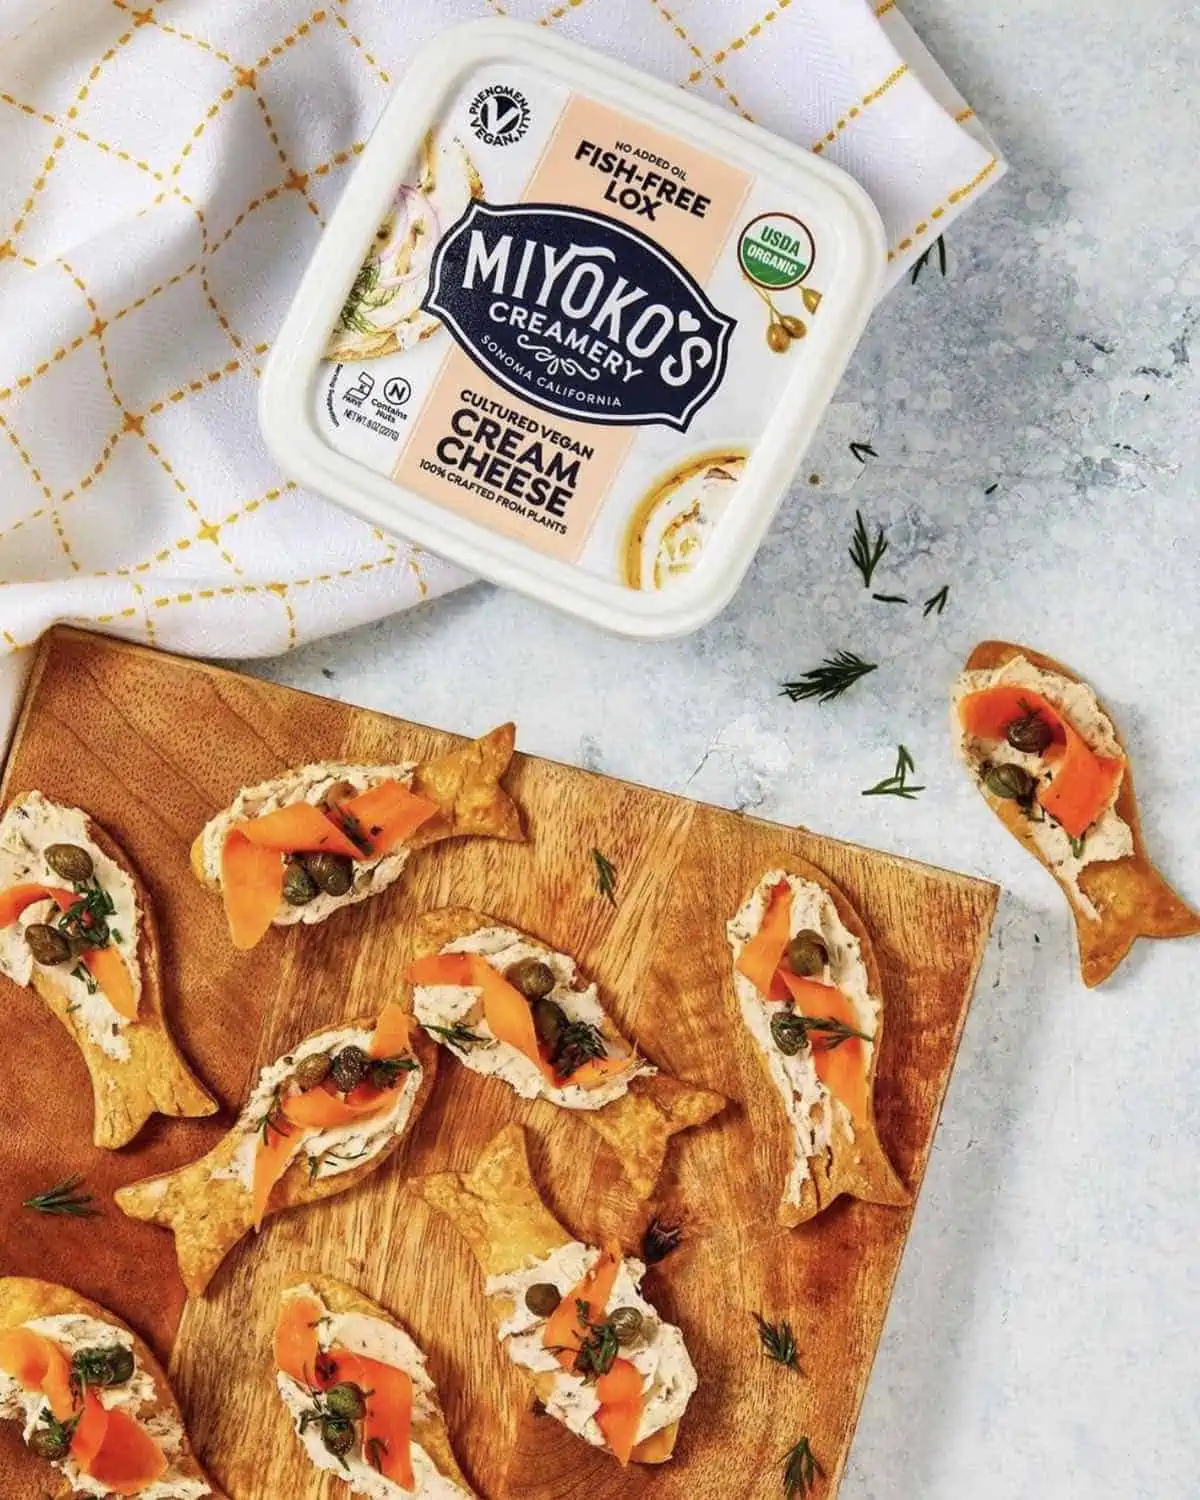 miyokos fish free lox cream cheese served on cute fish crackers as an appetizer